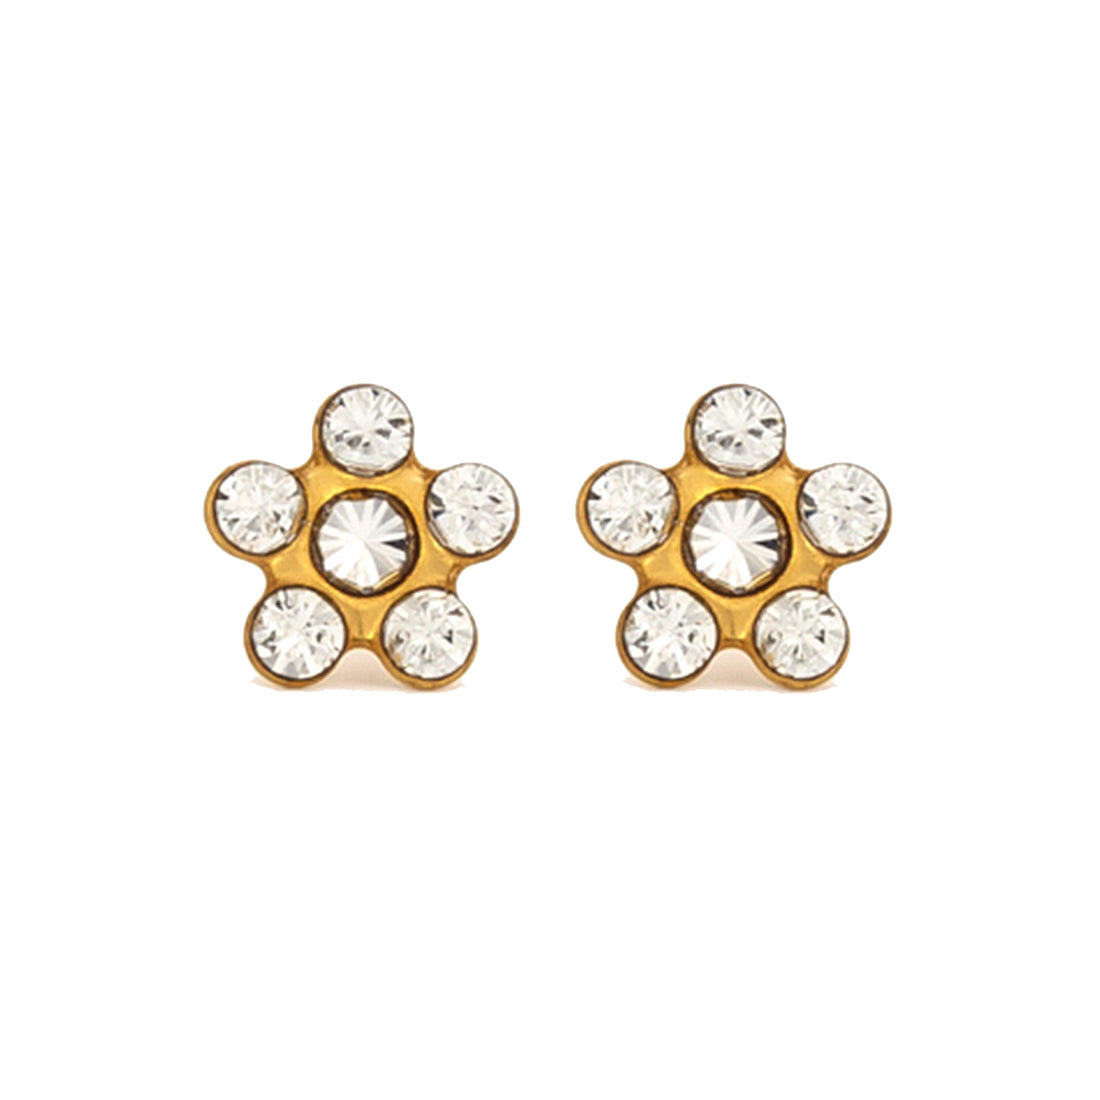 Daisy April Crystal 24K Pure Gold Plated Piercing Ear Stud